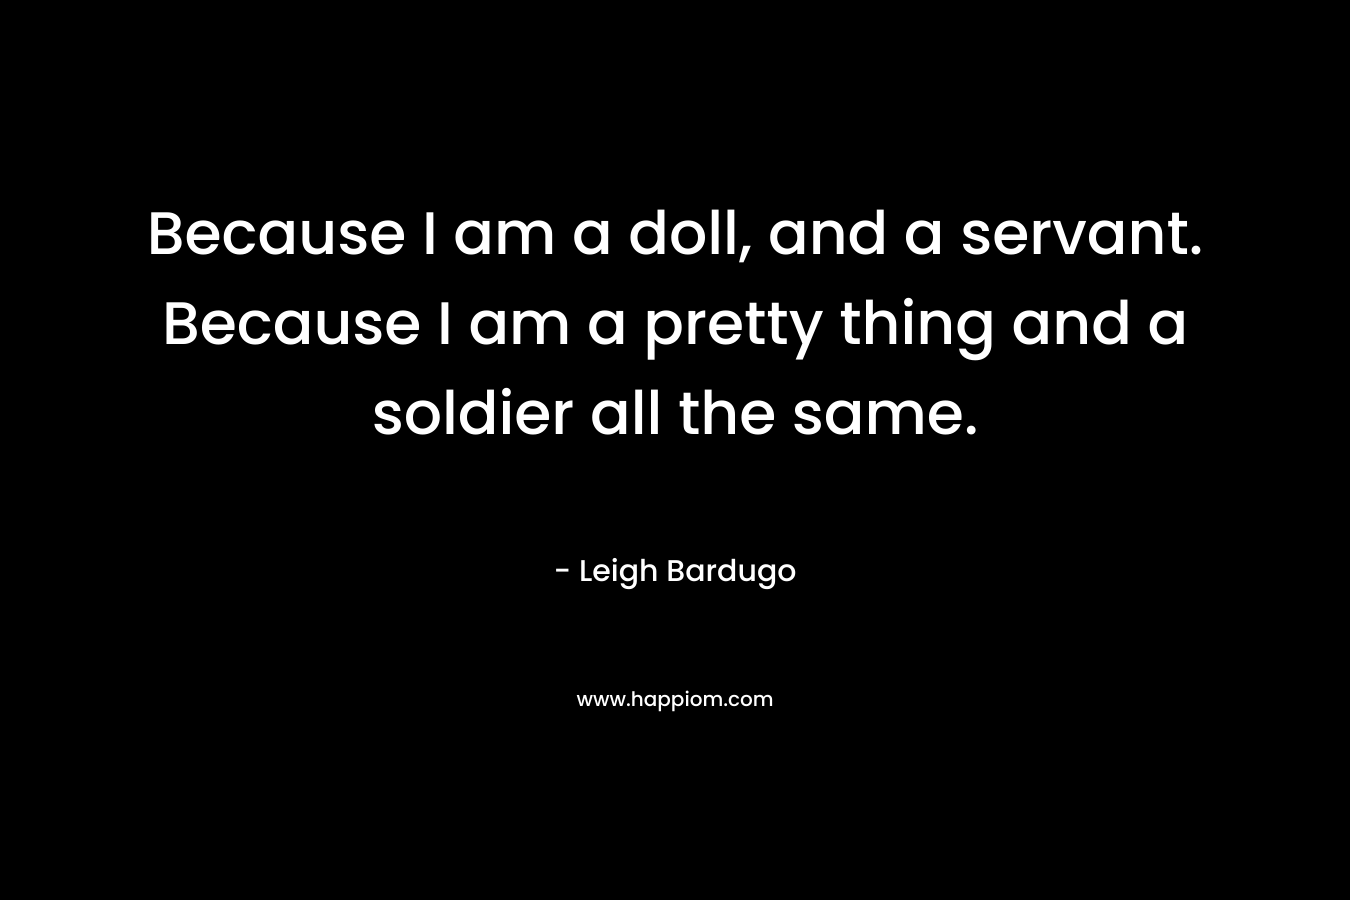 Because I am a doll, and a servant. Because I am a pretty thing and a soldier all the same. – Leigh Bardugo